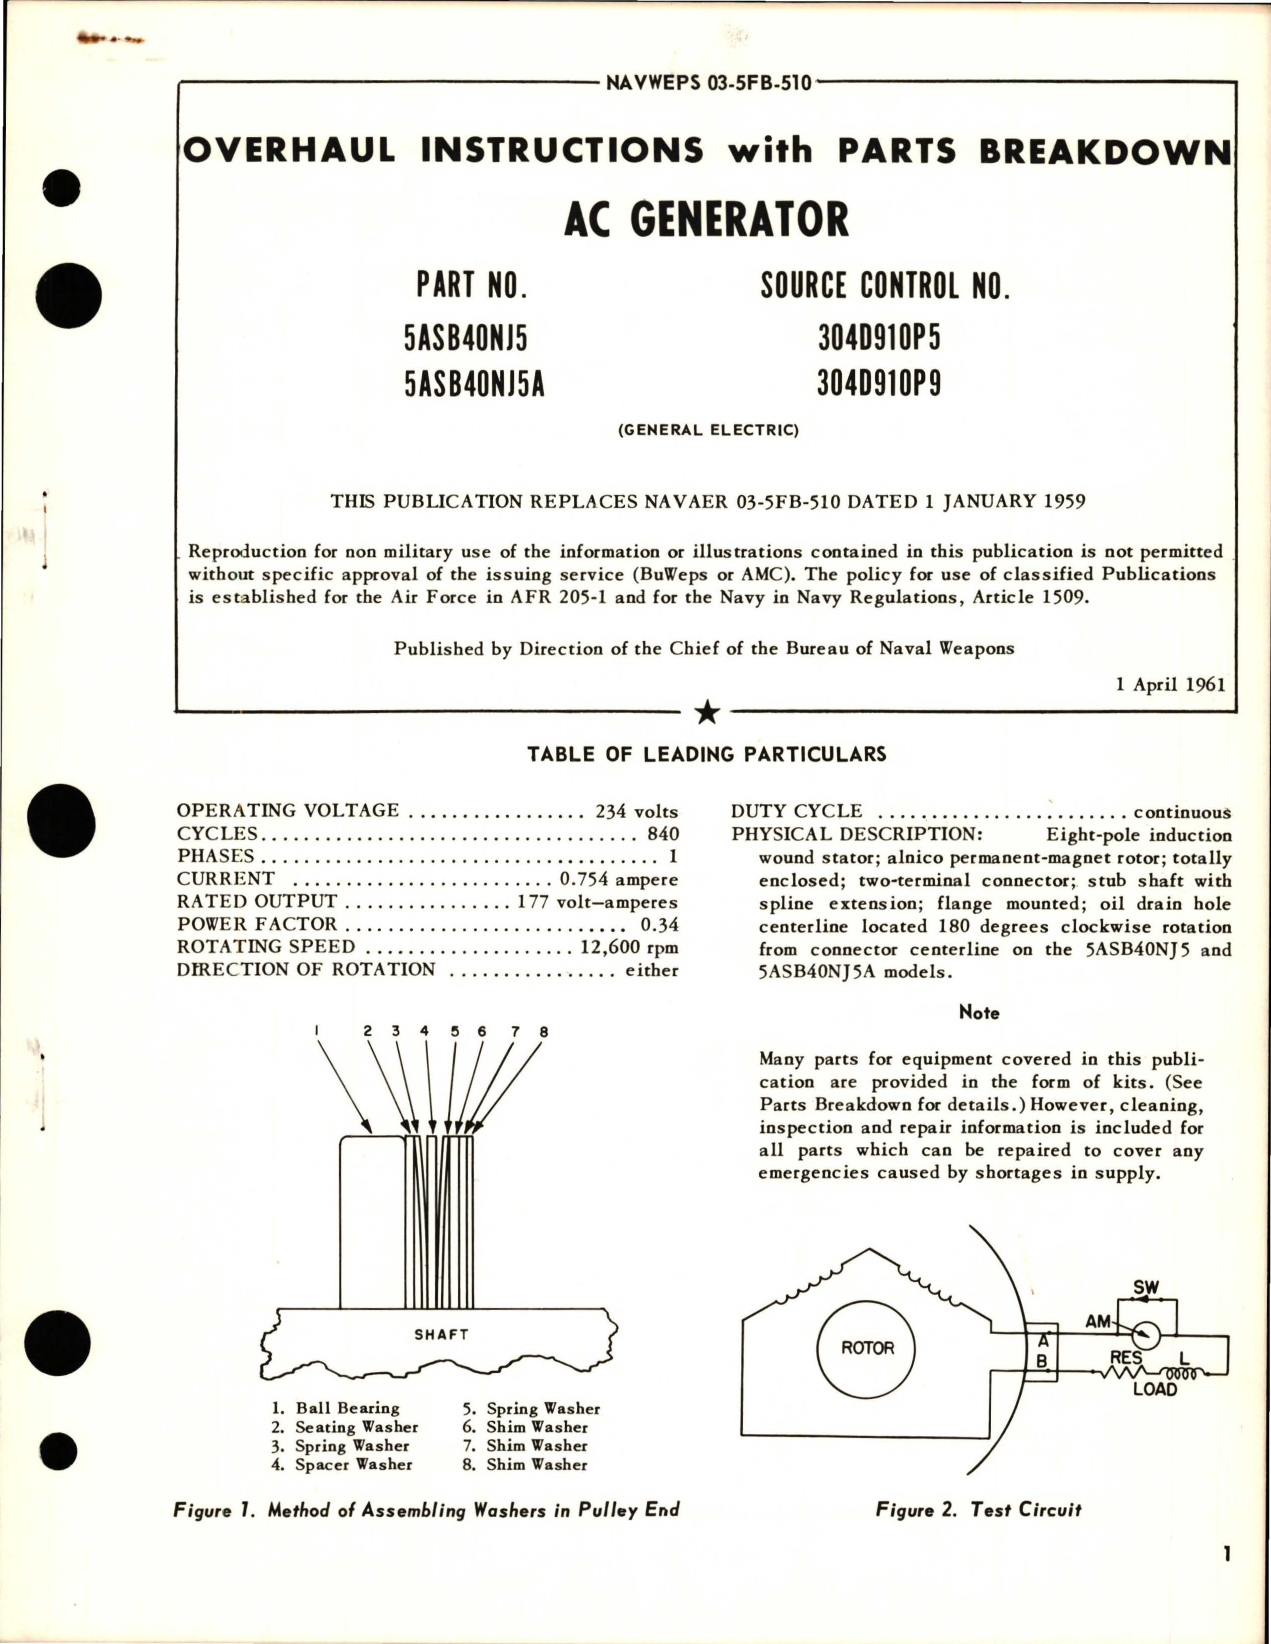 Sample page 1 from AirCorps Library document: Overhaul Instructions with Parts Breakdown for AC Generator - Parts 5ASB40NJ5 and 5ASB40NJ5A 